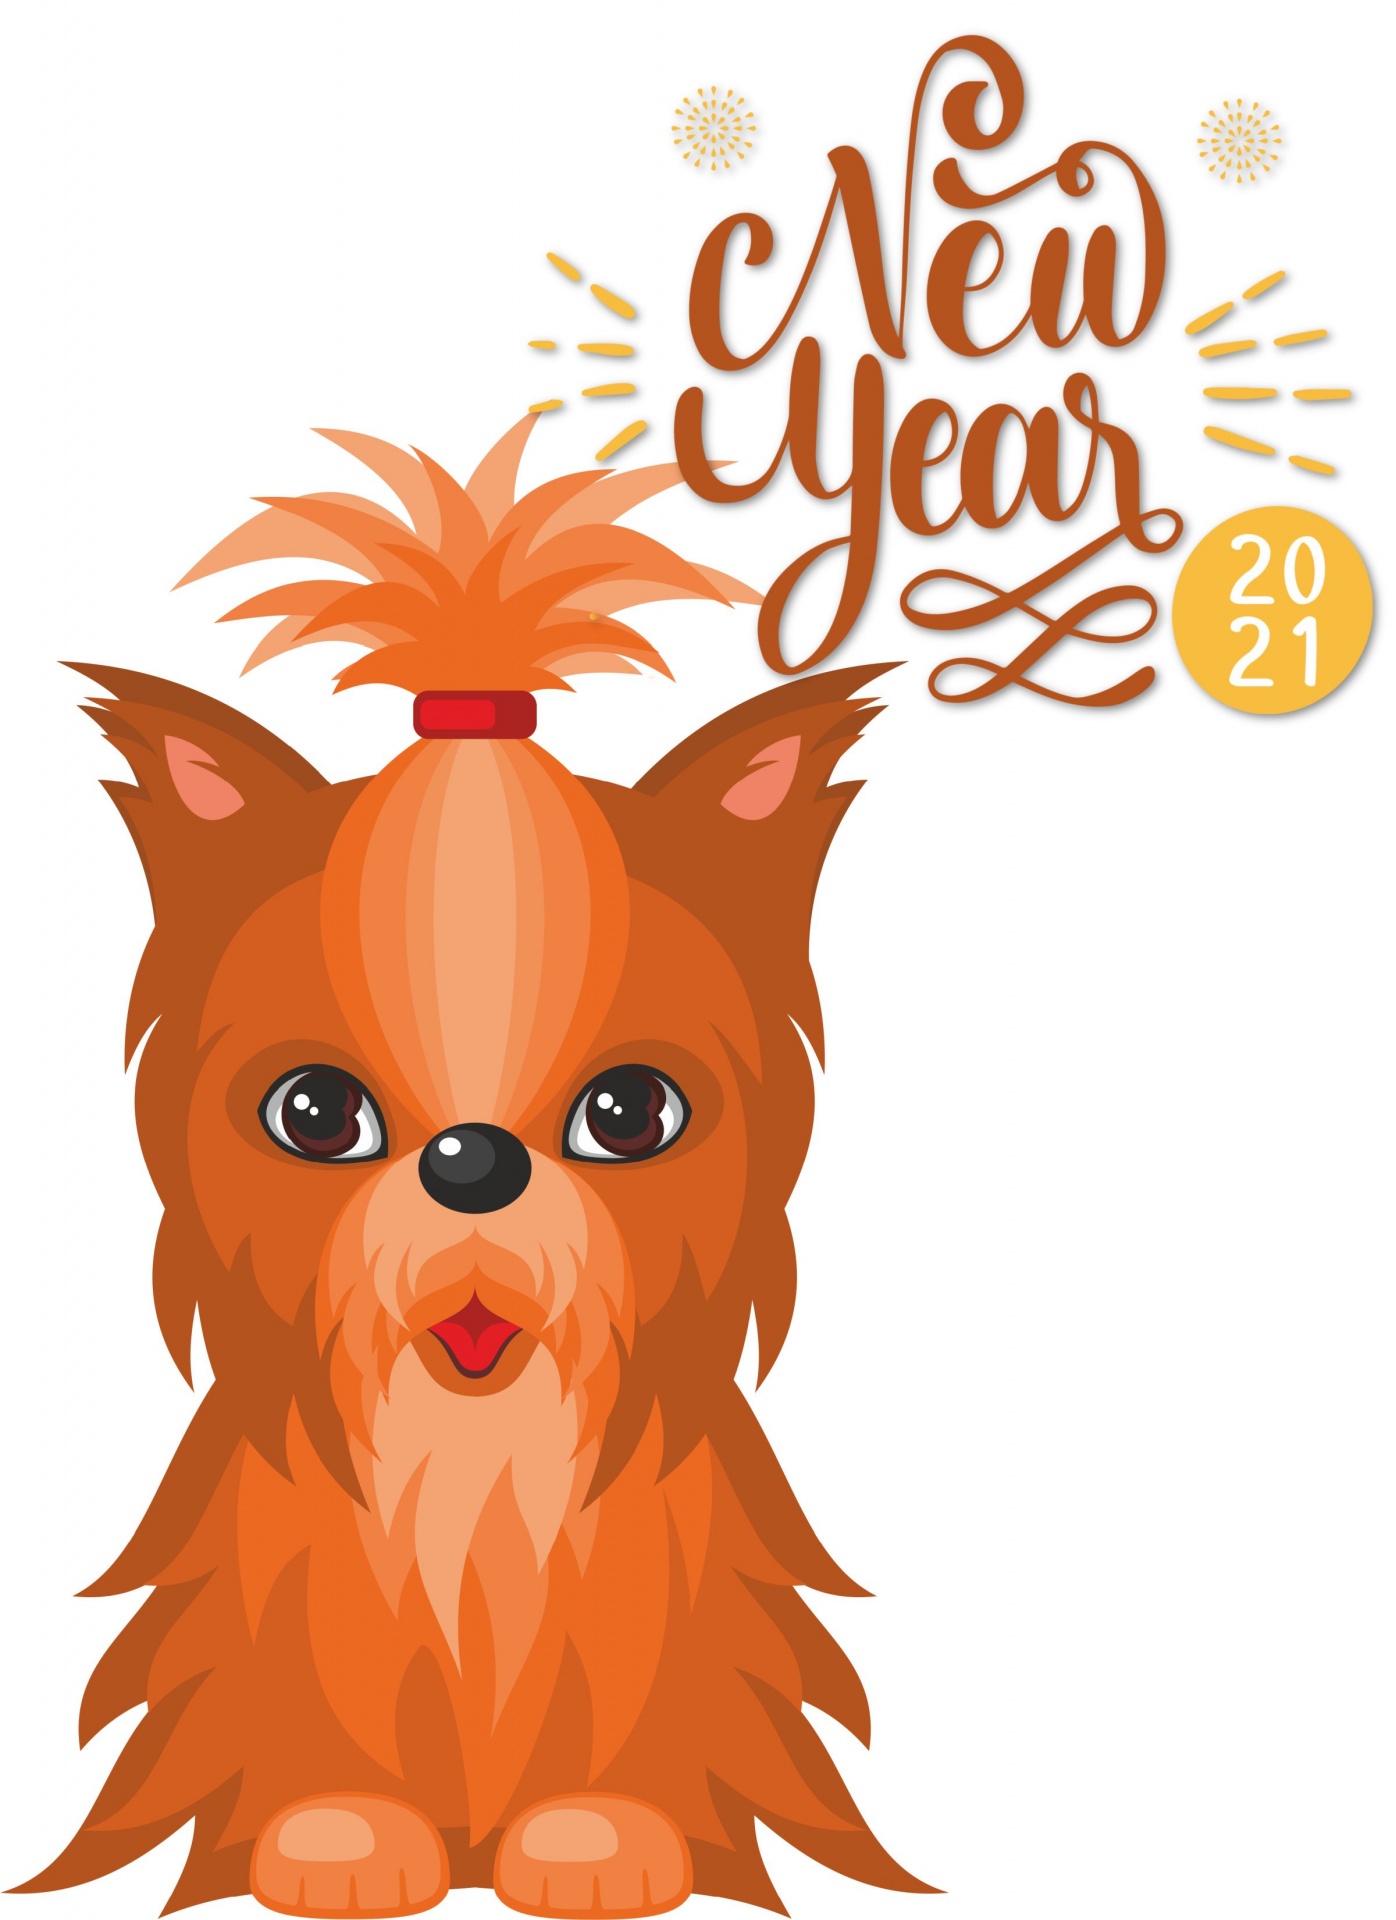 Yorkshire Terrier New Year